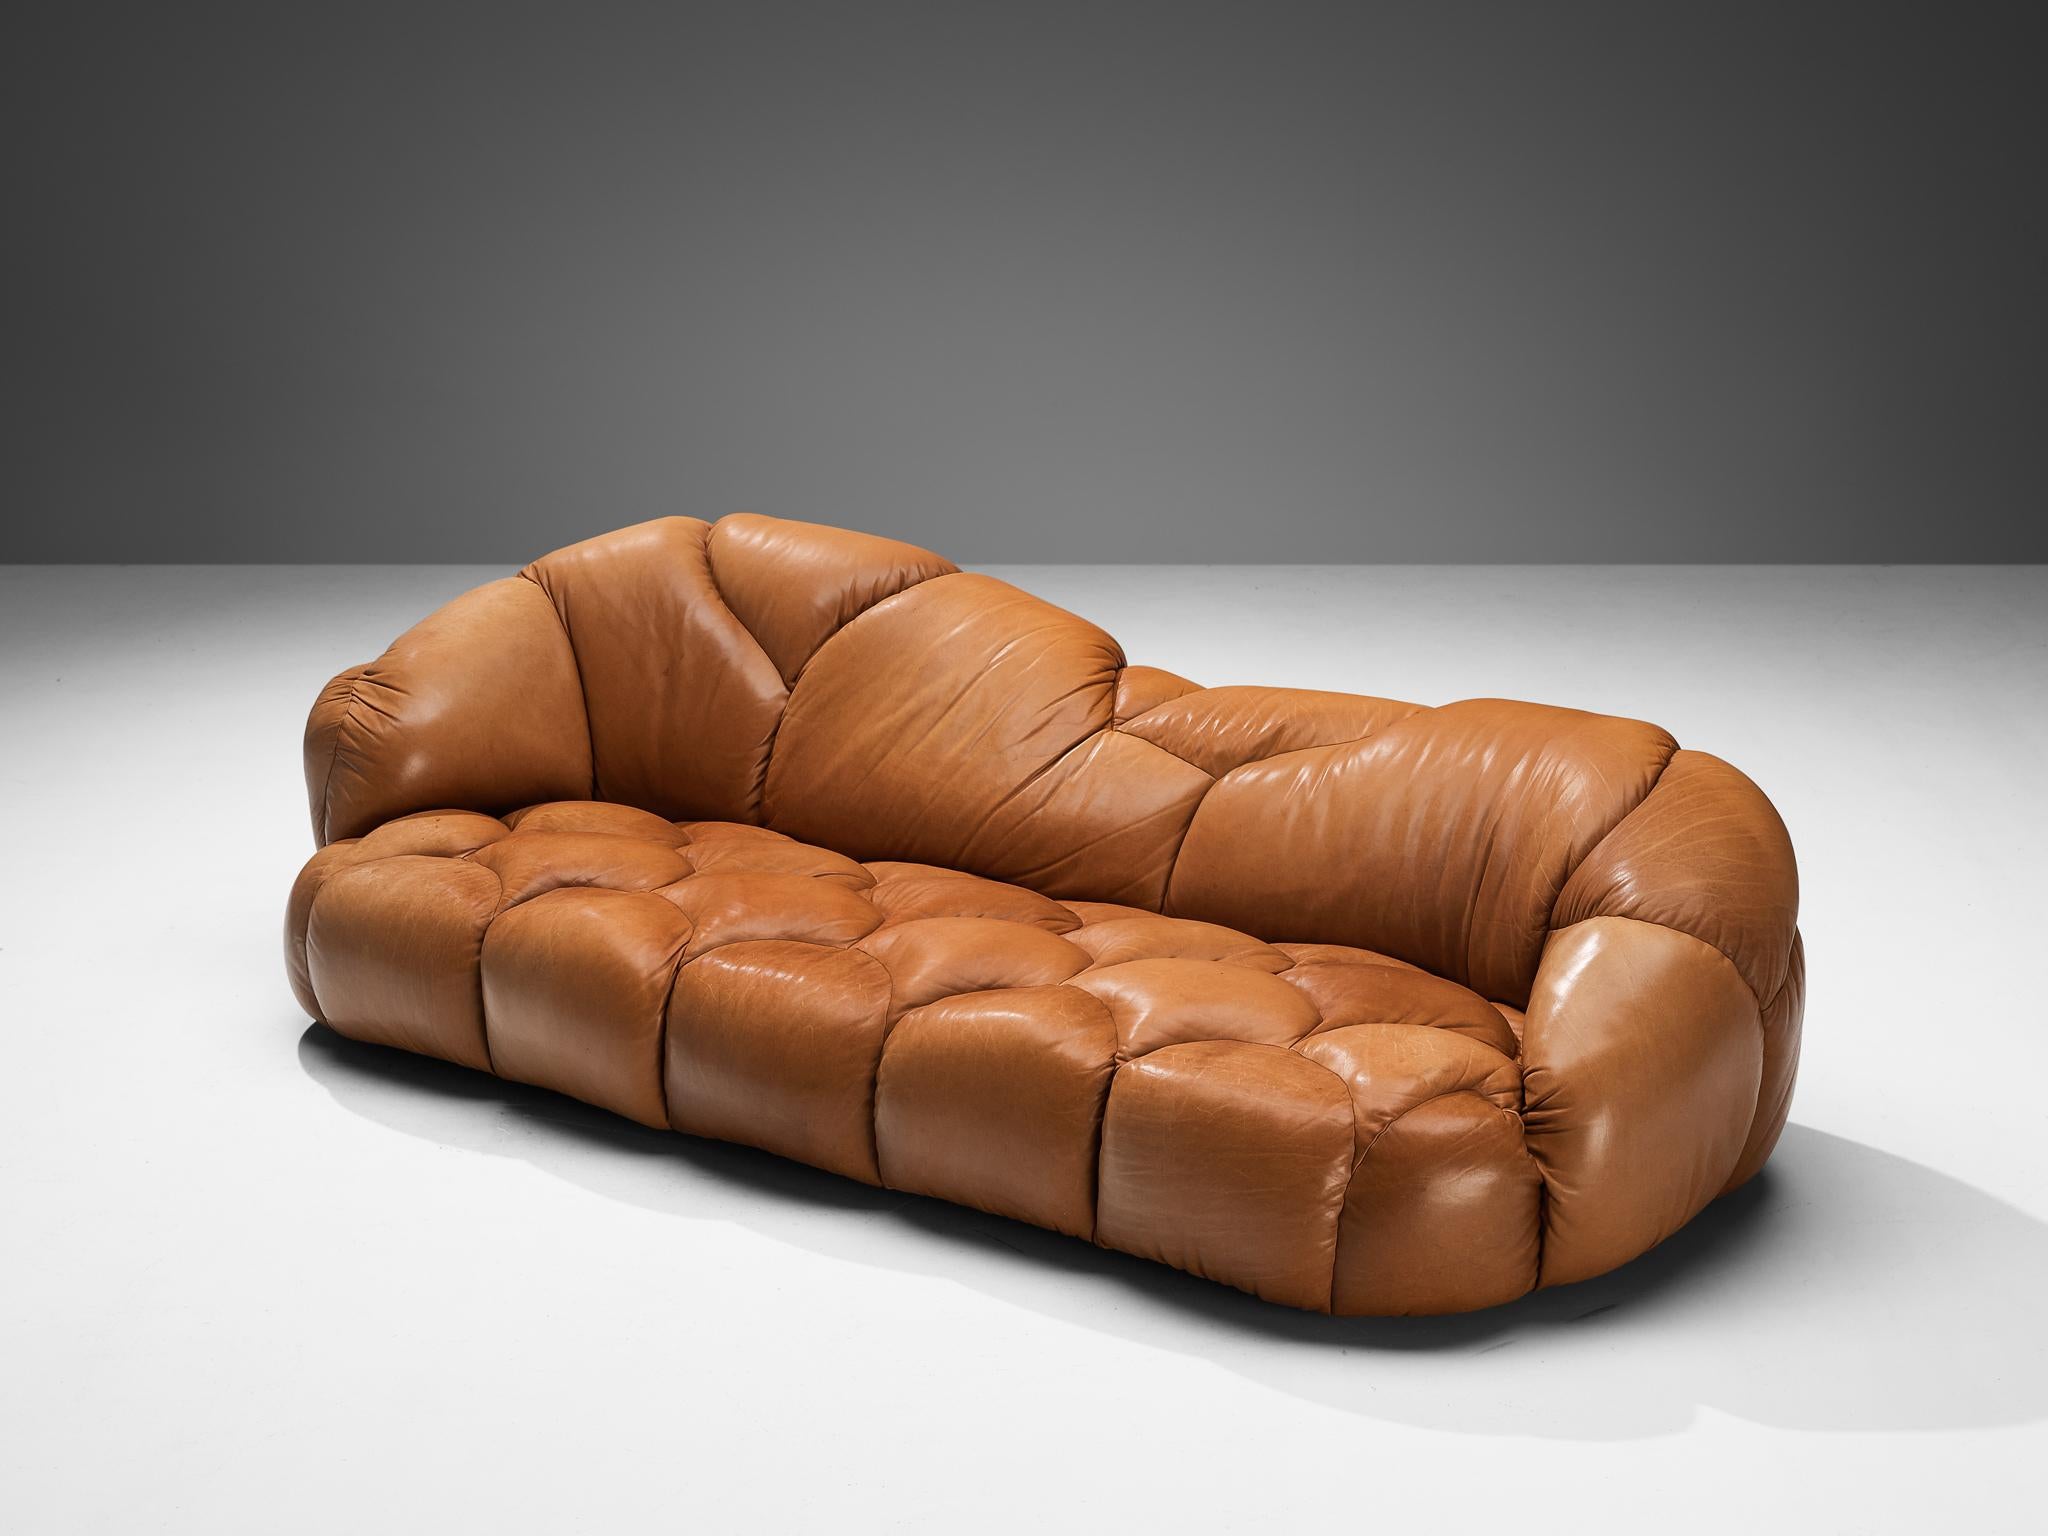 Howard Keith for HK Furniture, 'Cloud' sofa, leather, United Kingdom, 1970s.

The Howard Keith 'Cloud' sofa is a remarkable piece of furniture characterized by its captivating organic forms. With its low seat, sinuous contours, and generously